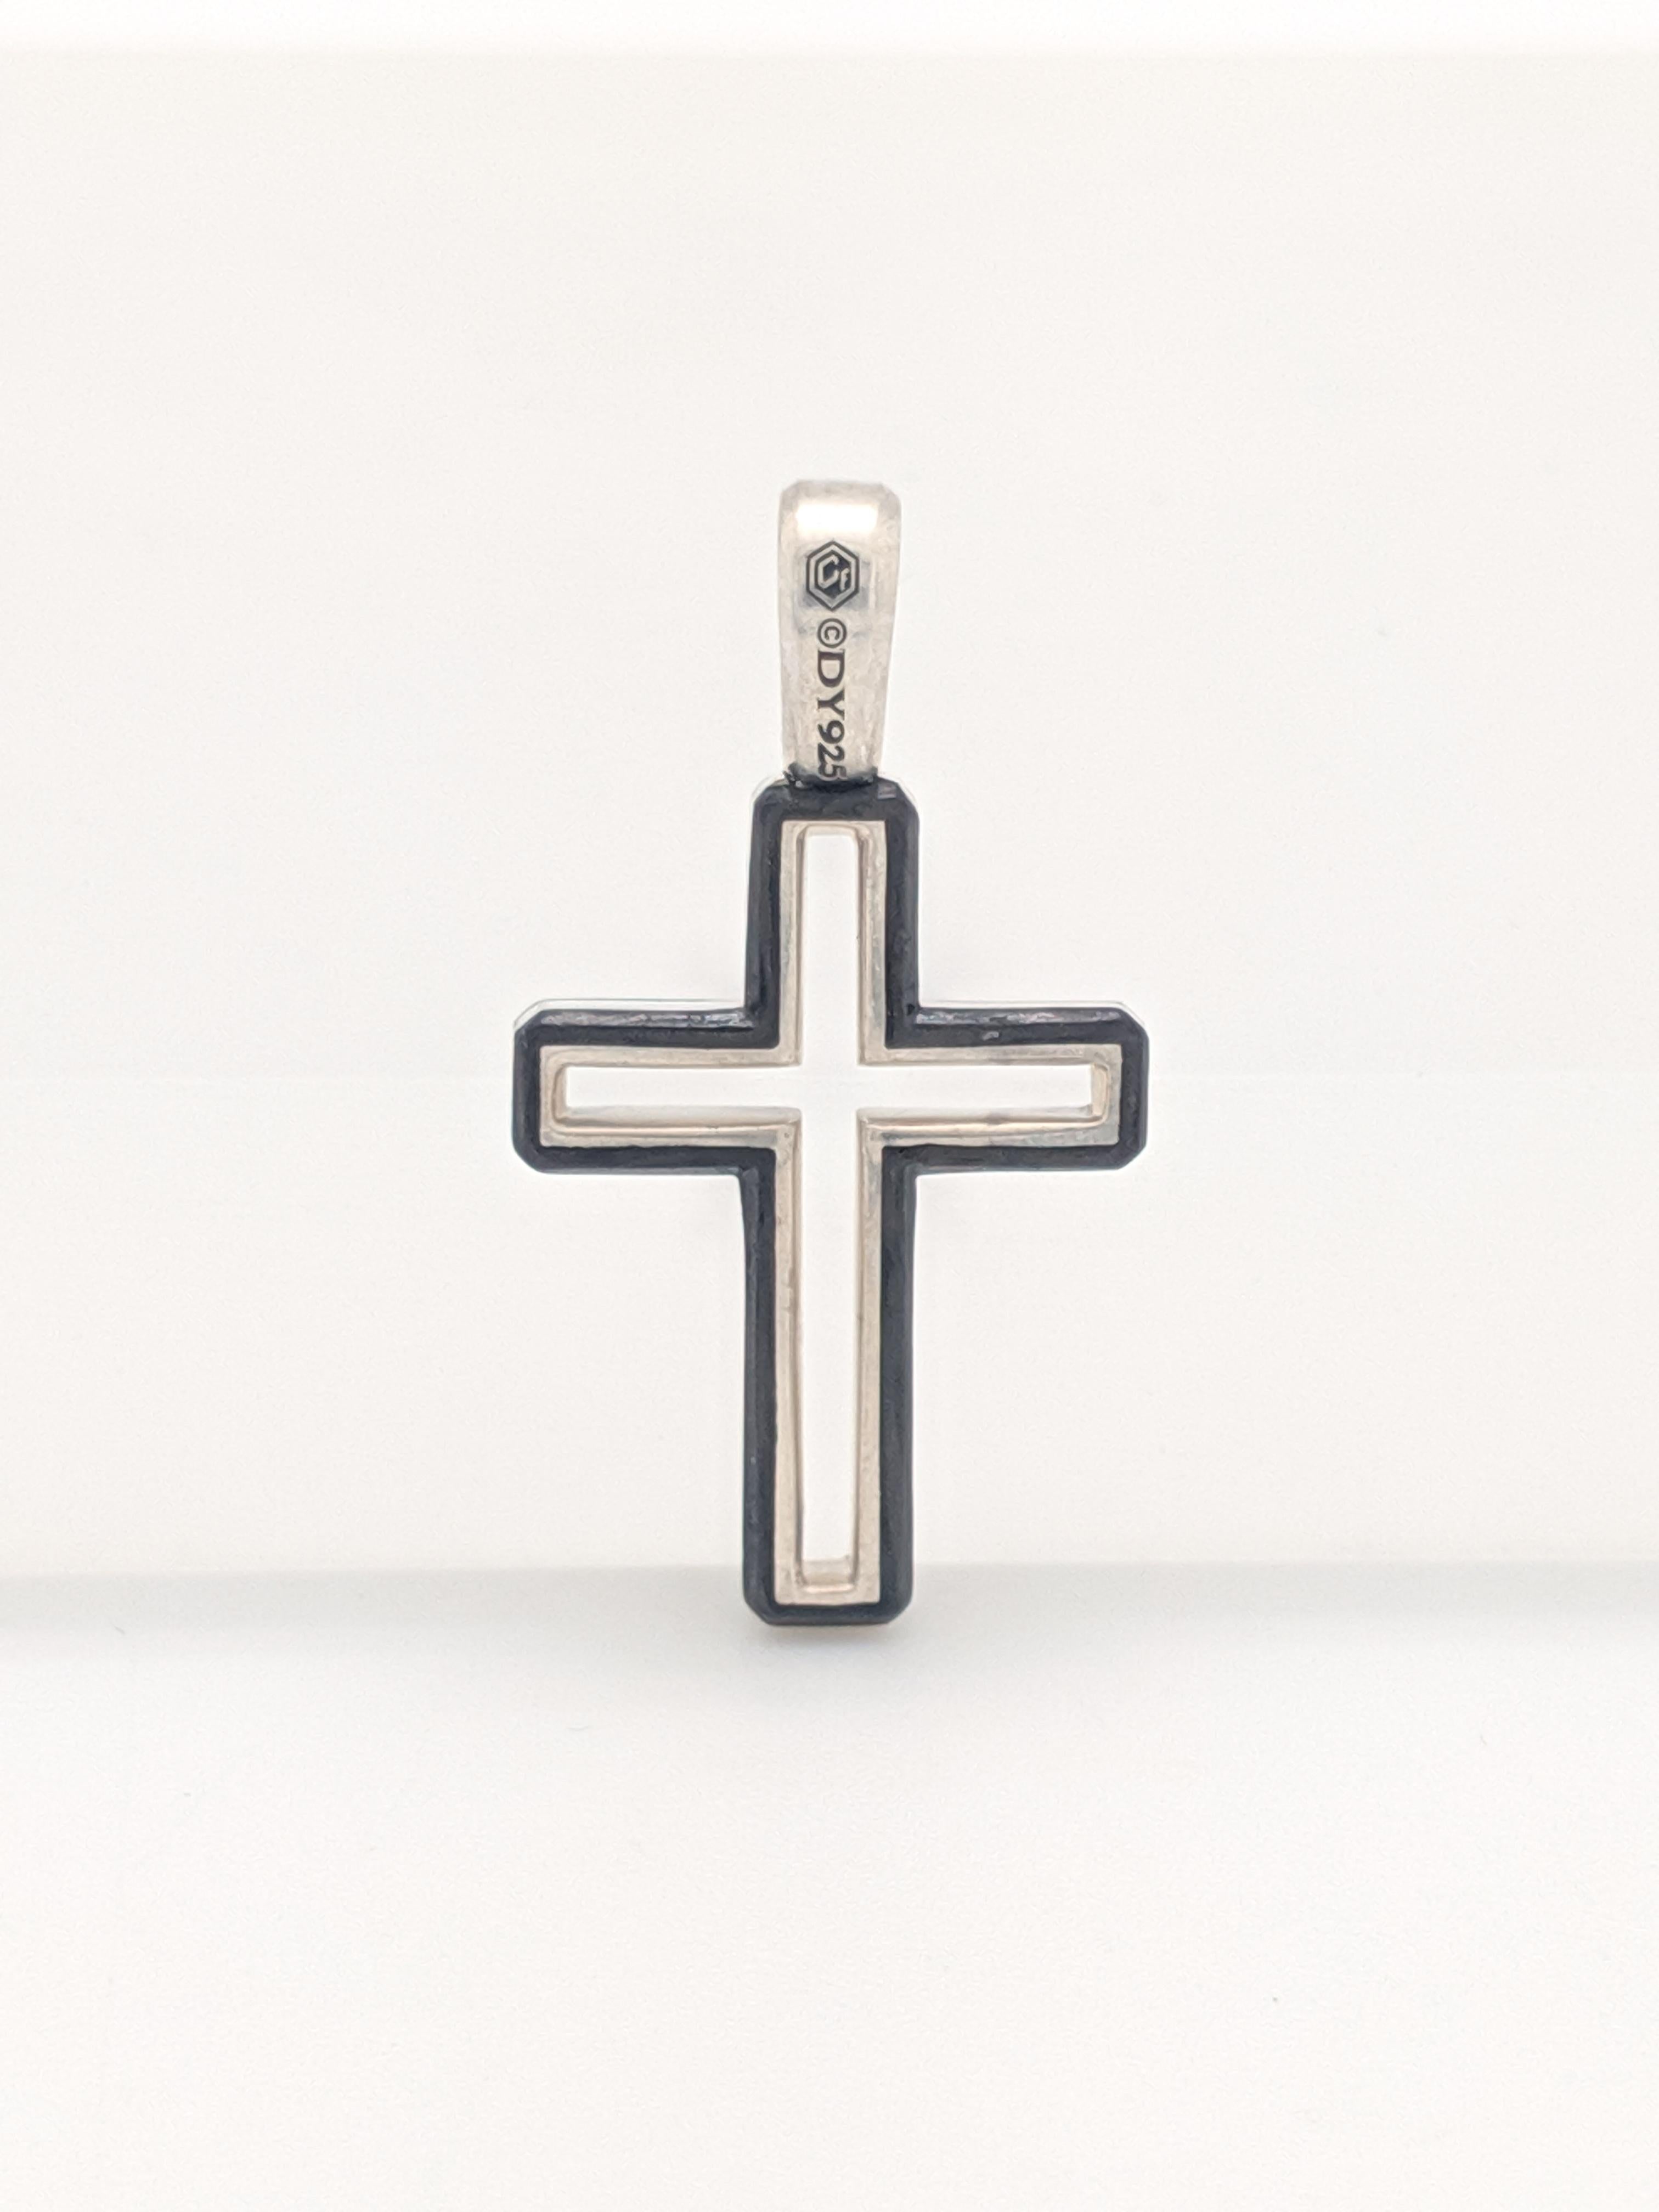 NWOT David Yurman 24mm Forged Carbon Cross Pendant
Retail $450
HJL:2019.ST

You are viewing an Authentic David Yurman Forged Carbon Cross Pendant from their Forged Carbon Collection.

Sterling silver
Forged Carbon
Pendant, 24mm

This David Yurman